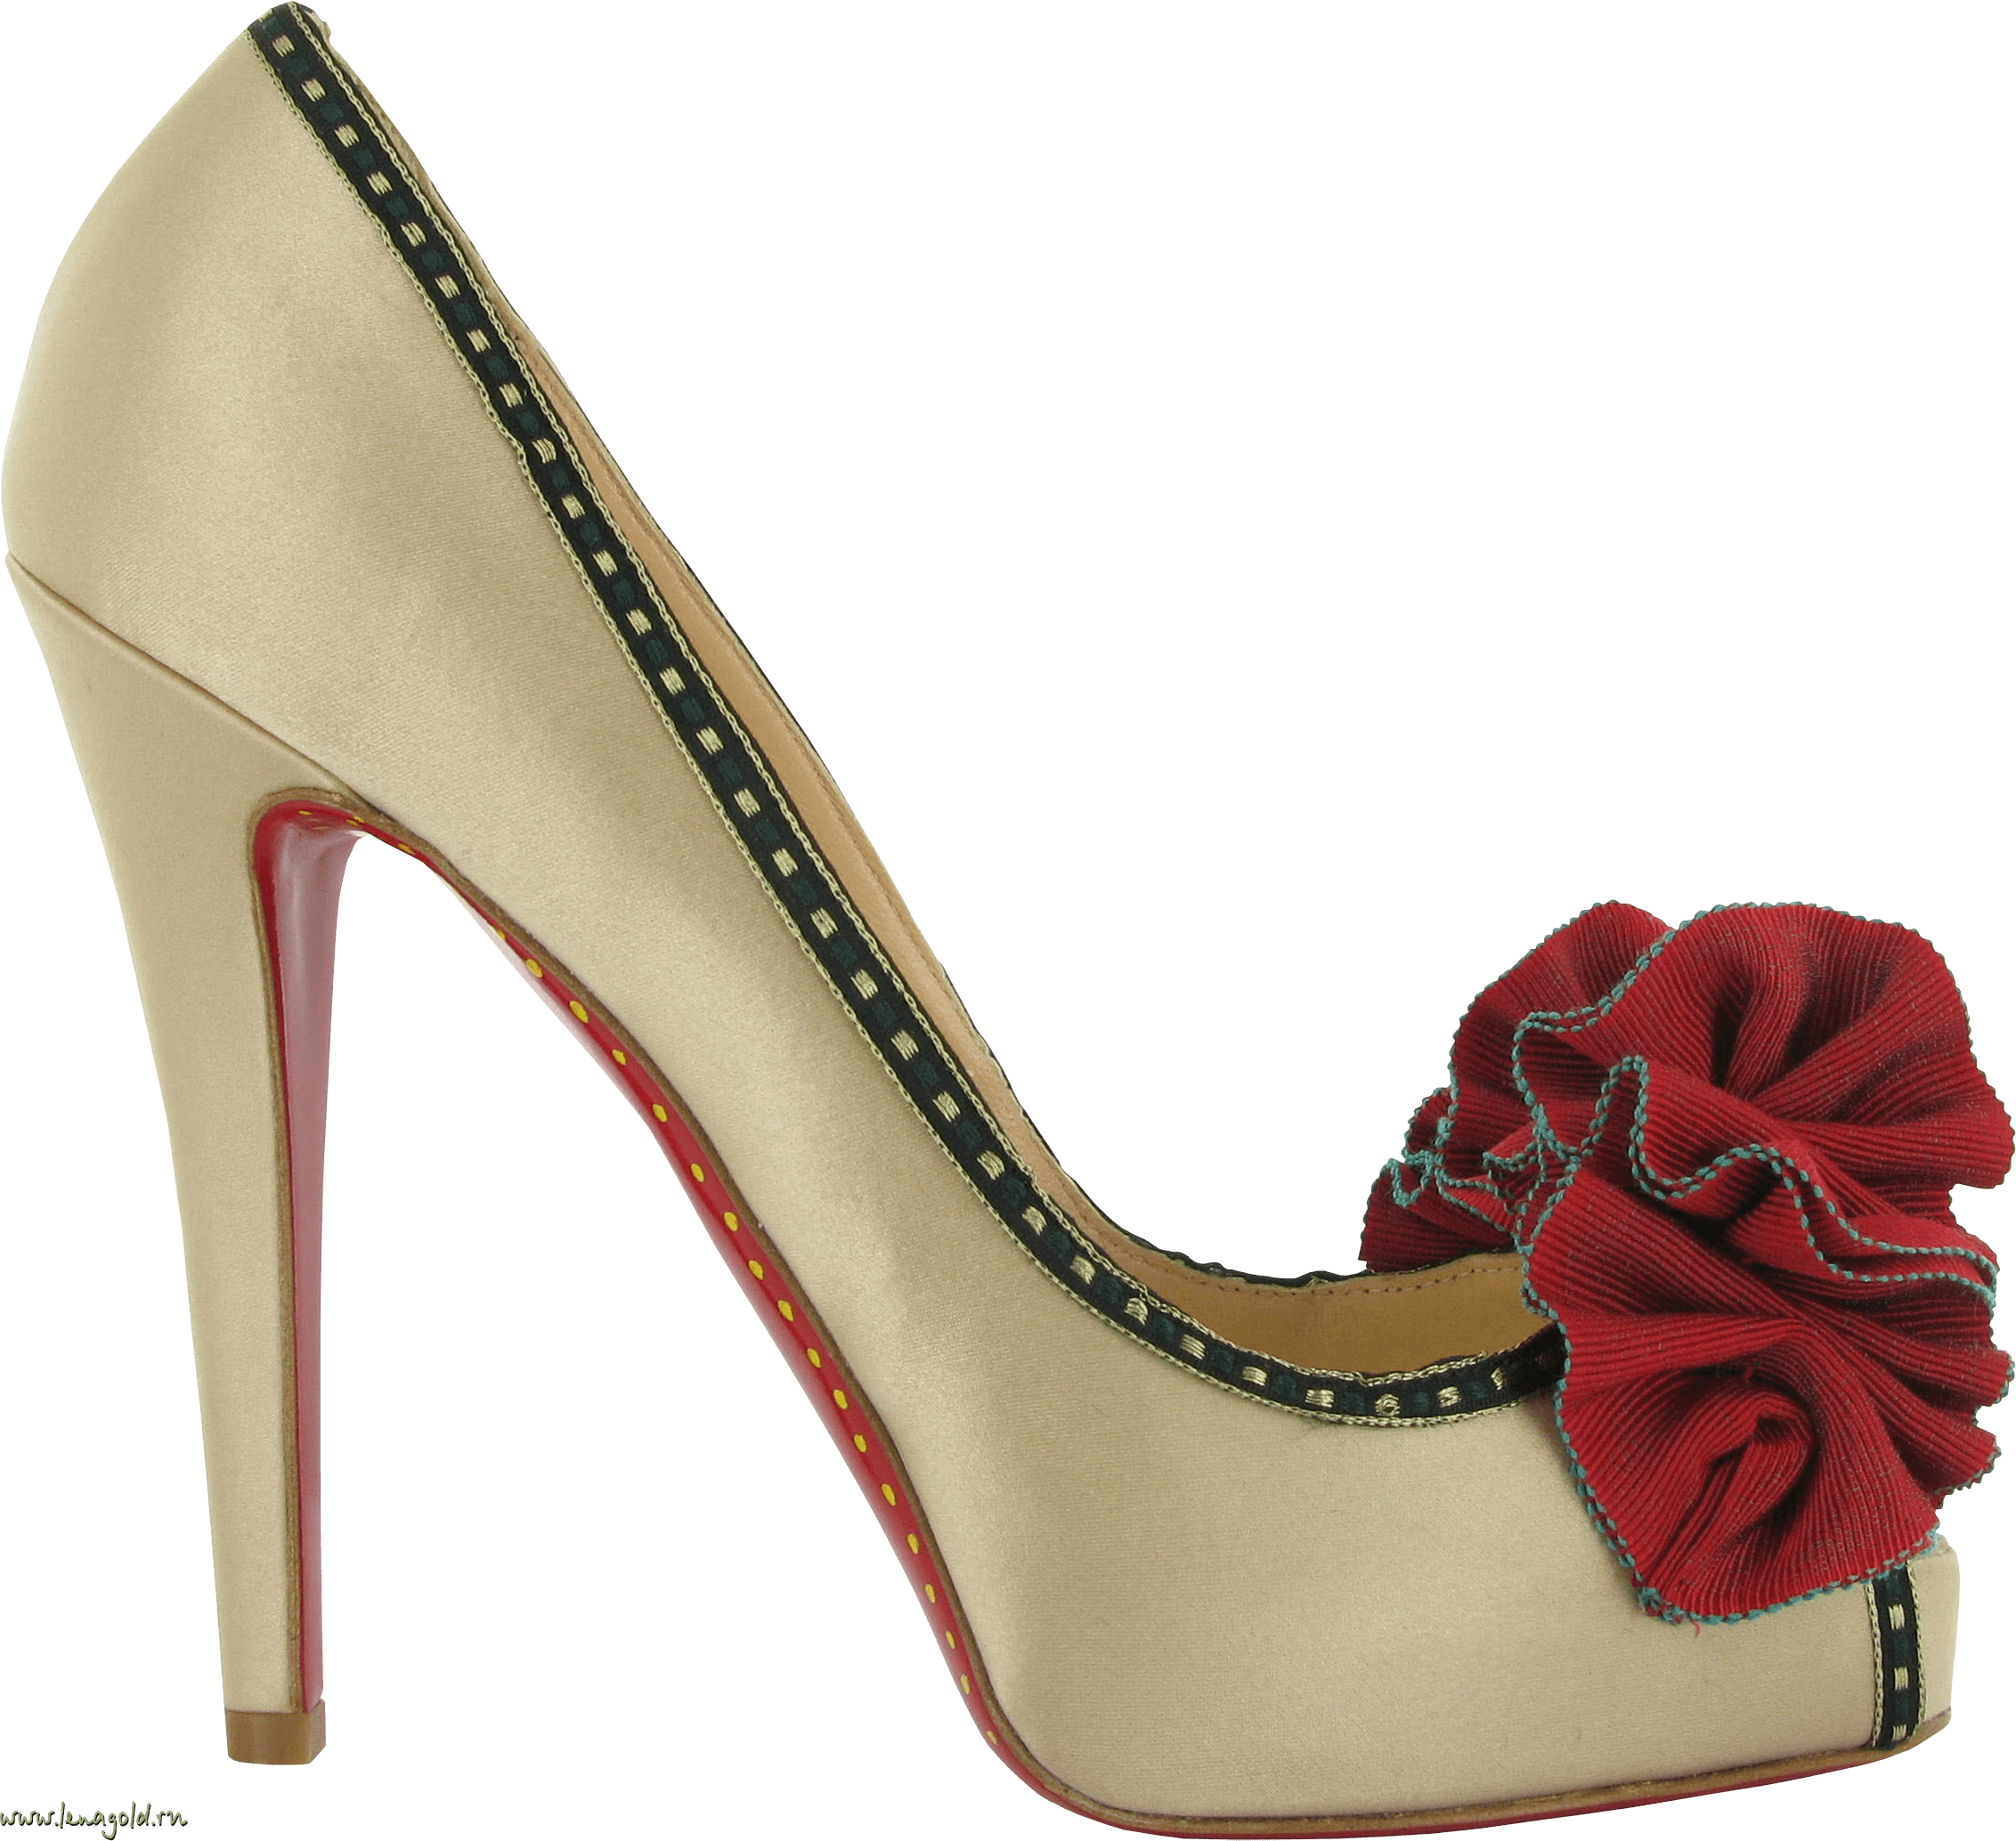 PNG File Name: Women Shoes Pl